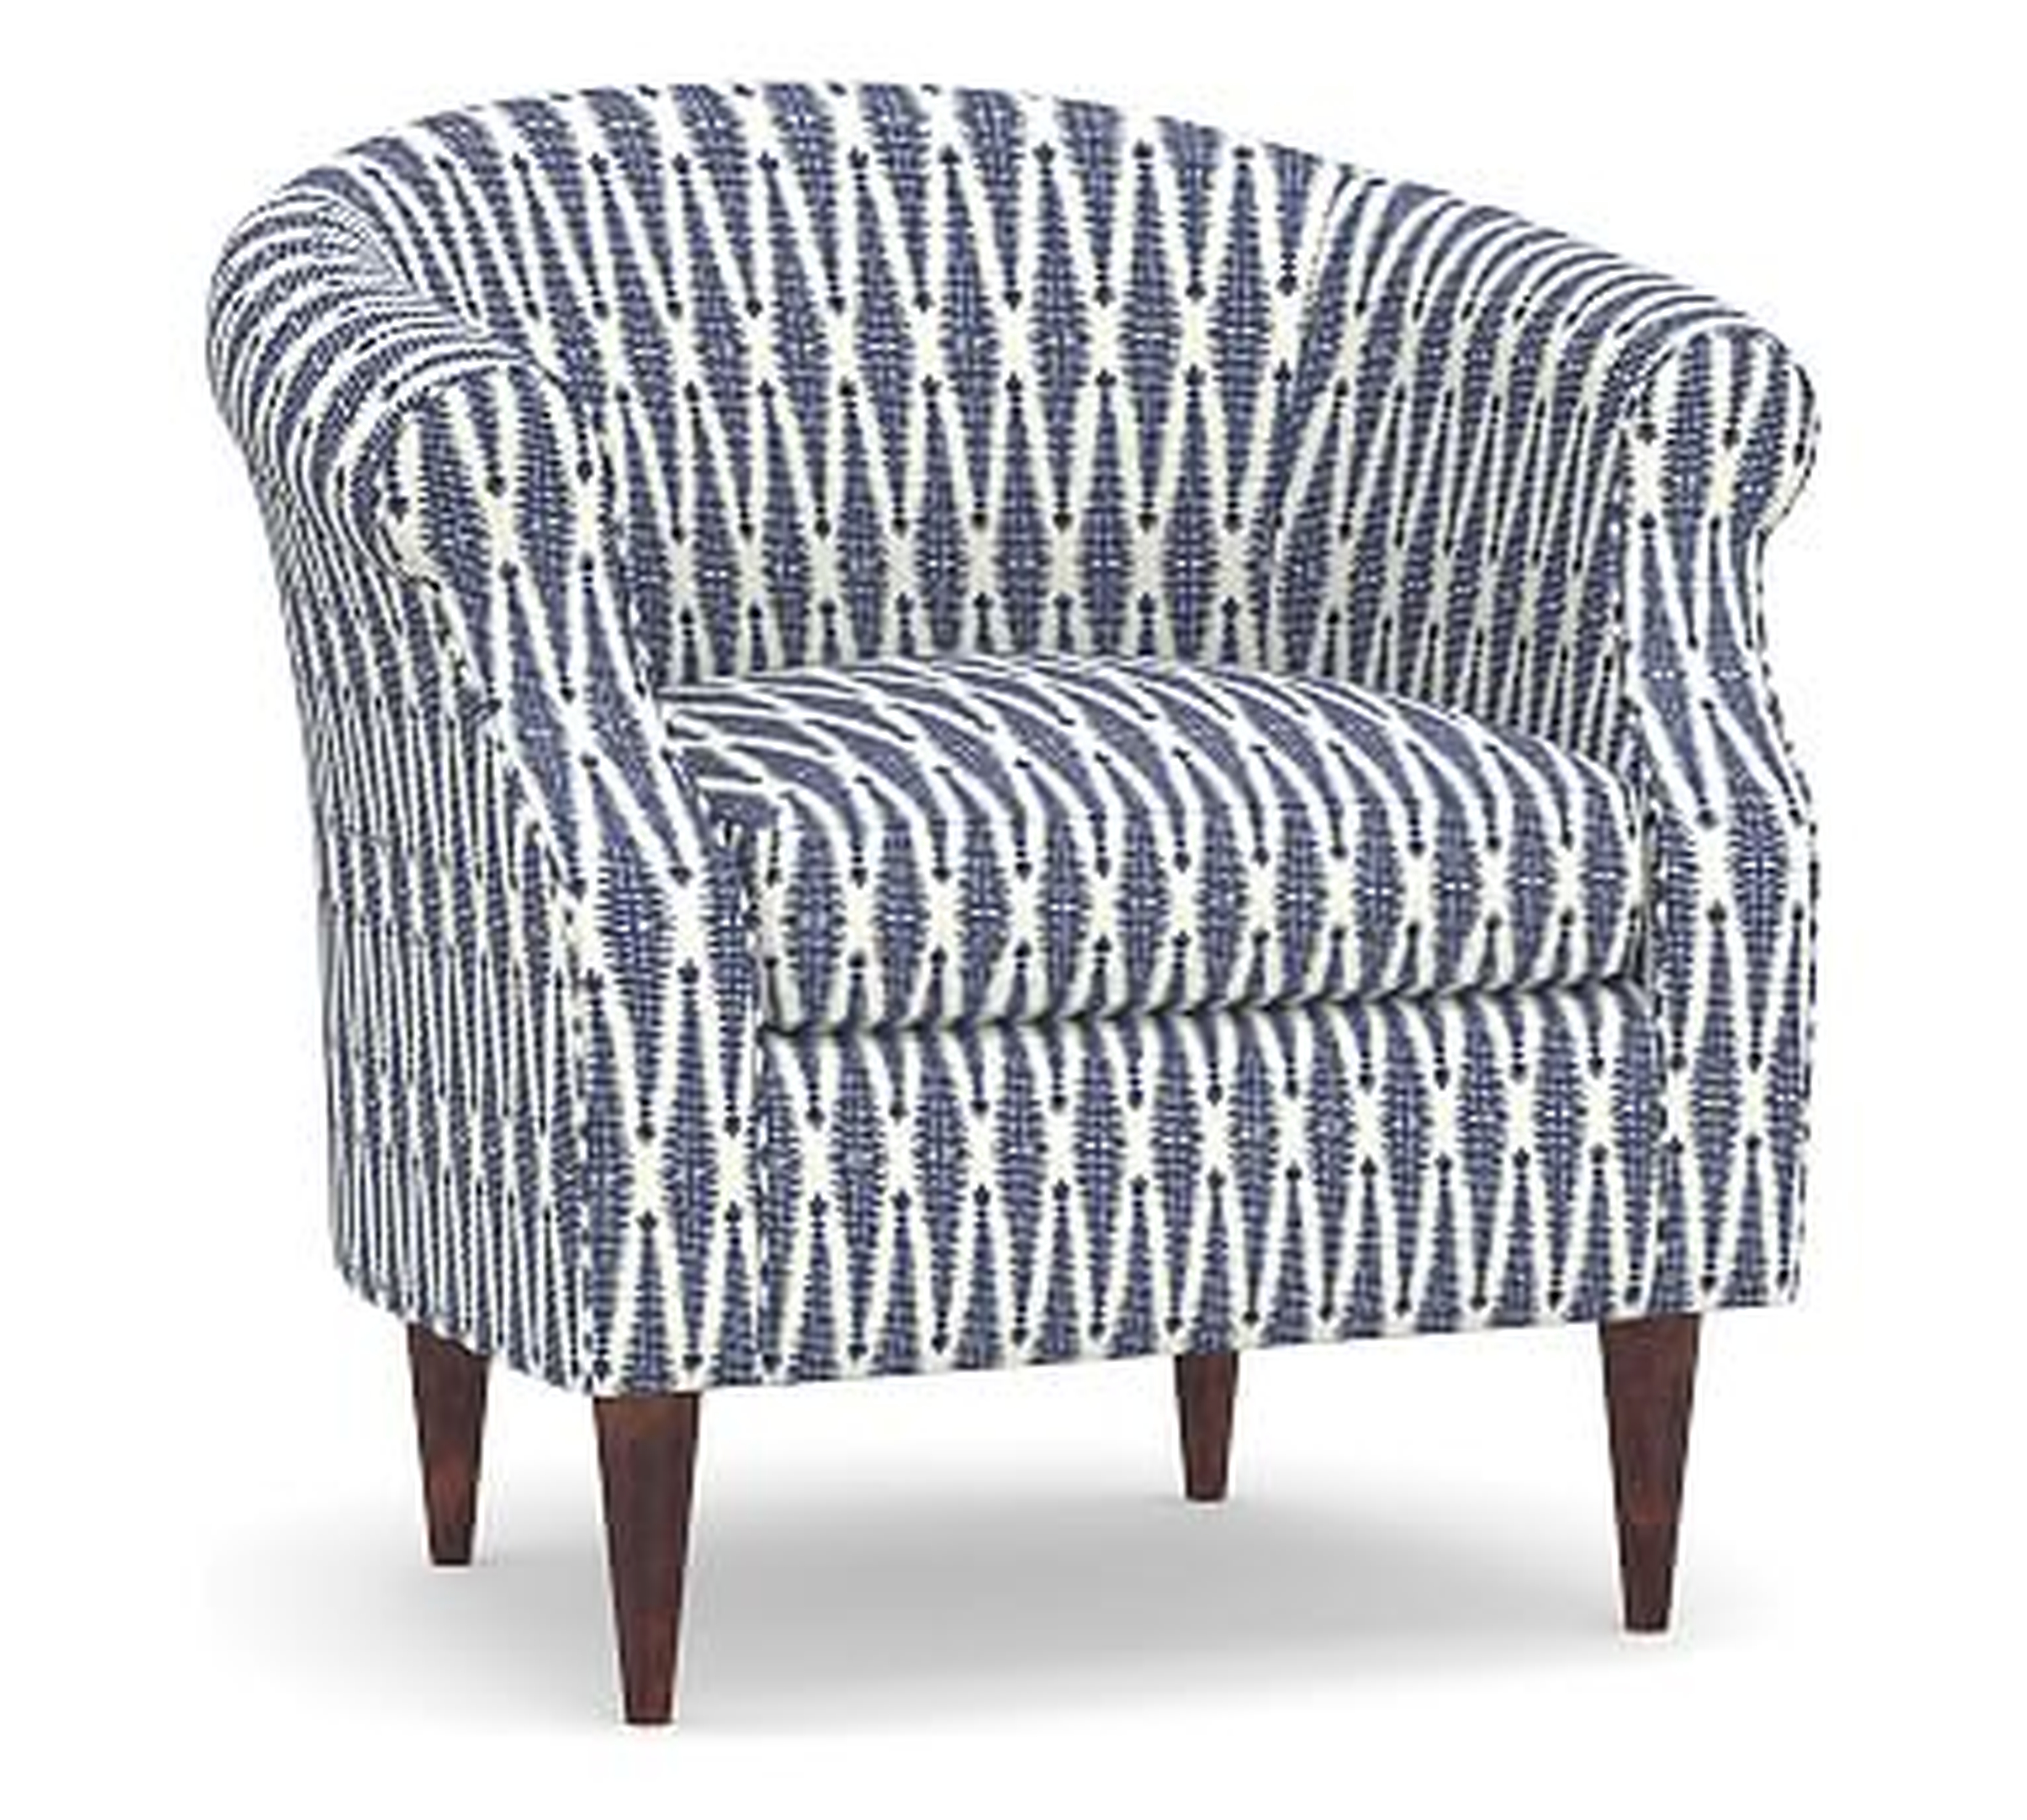 SoMa Lyndon Upholstered Armchair, Polyester Wrapped Cushions, Shalimar Jacquard Blue - Pottery Barn